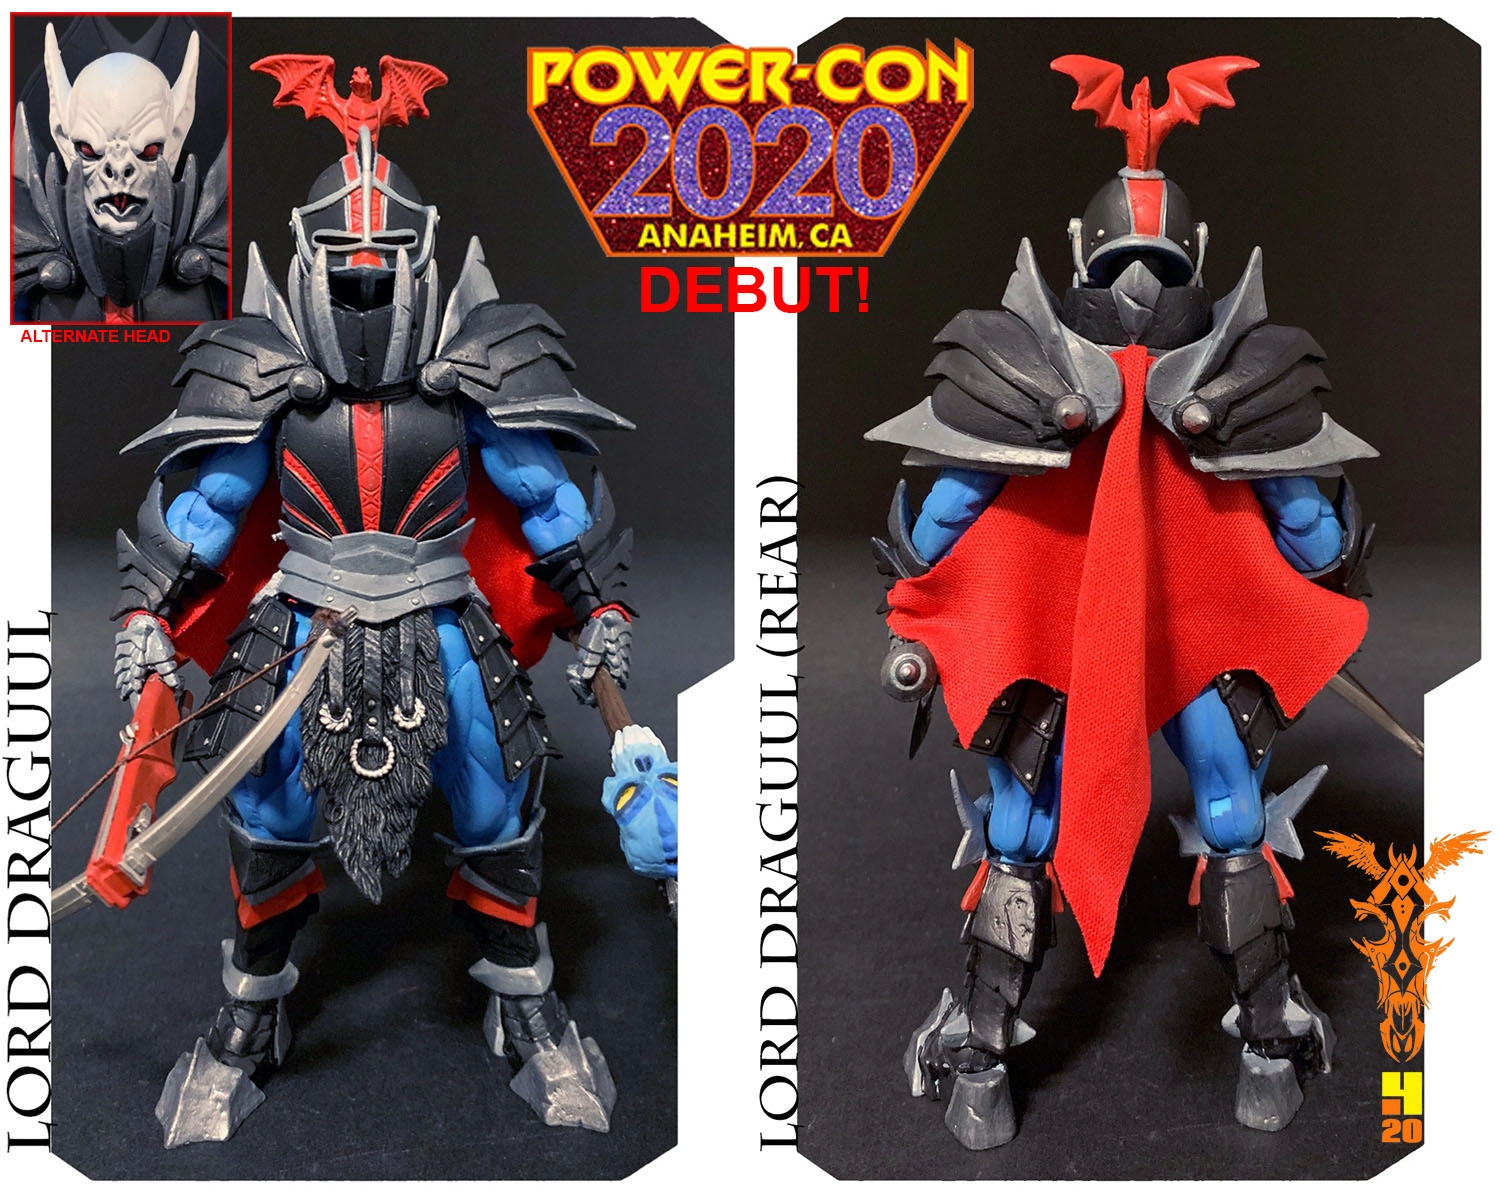 Mythic Legions Power-Con 2020 debut figures